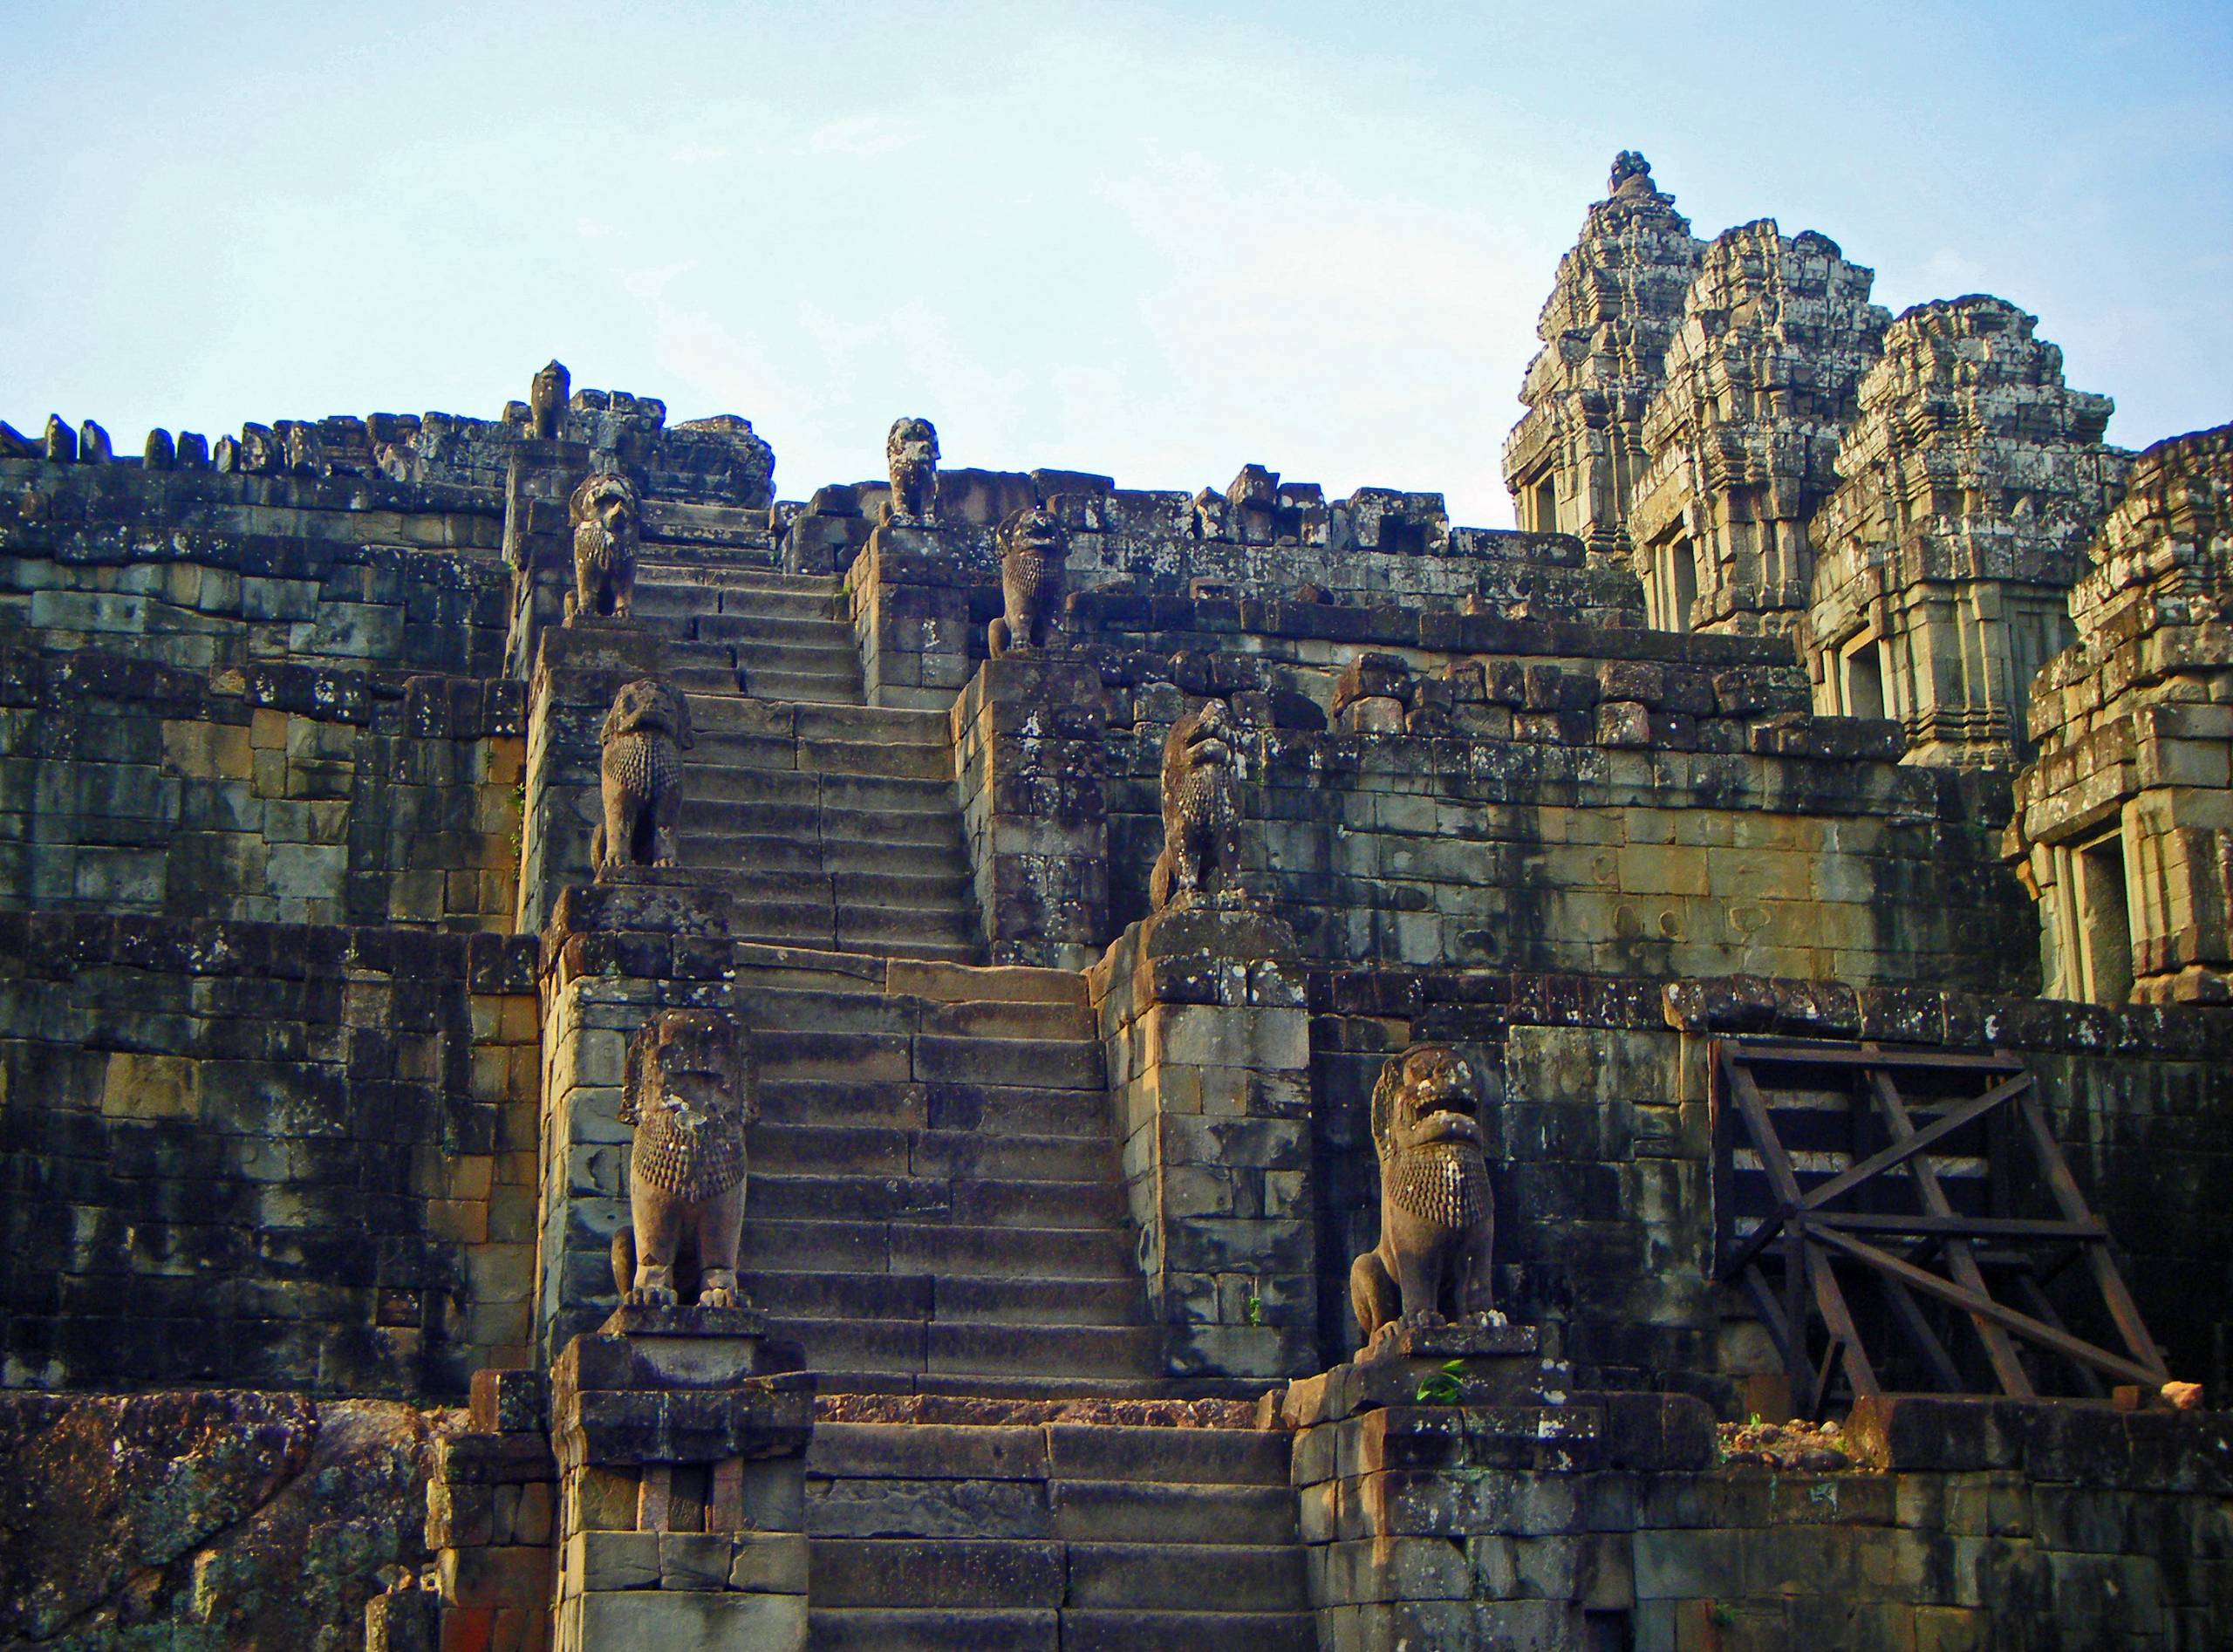 A stone staircase leading up to the entrance of Phnom Bakheng, with trees and jungle surrounding it